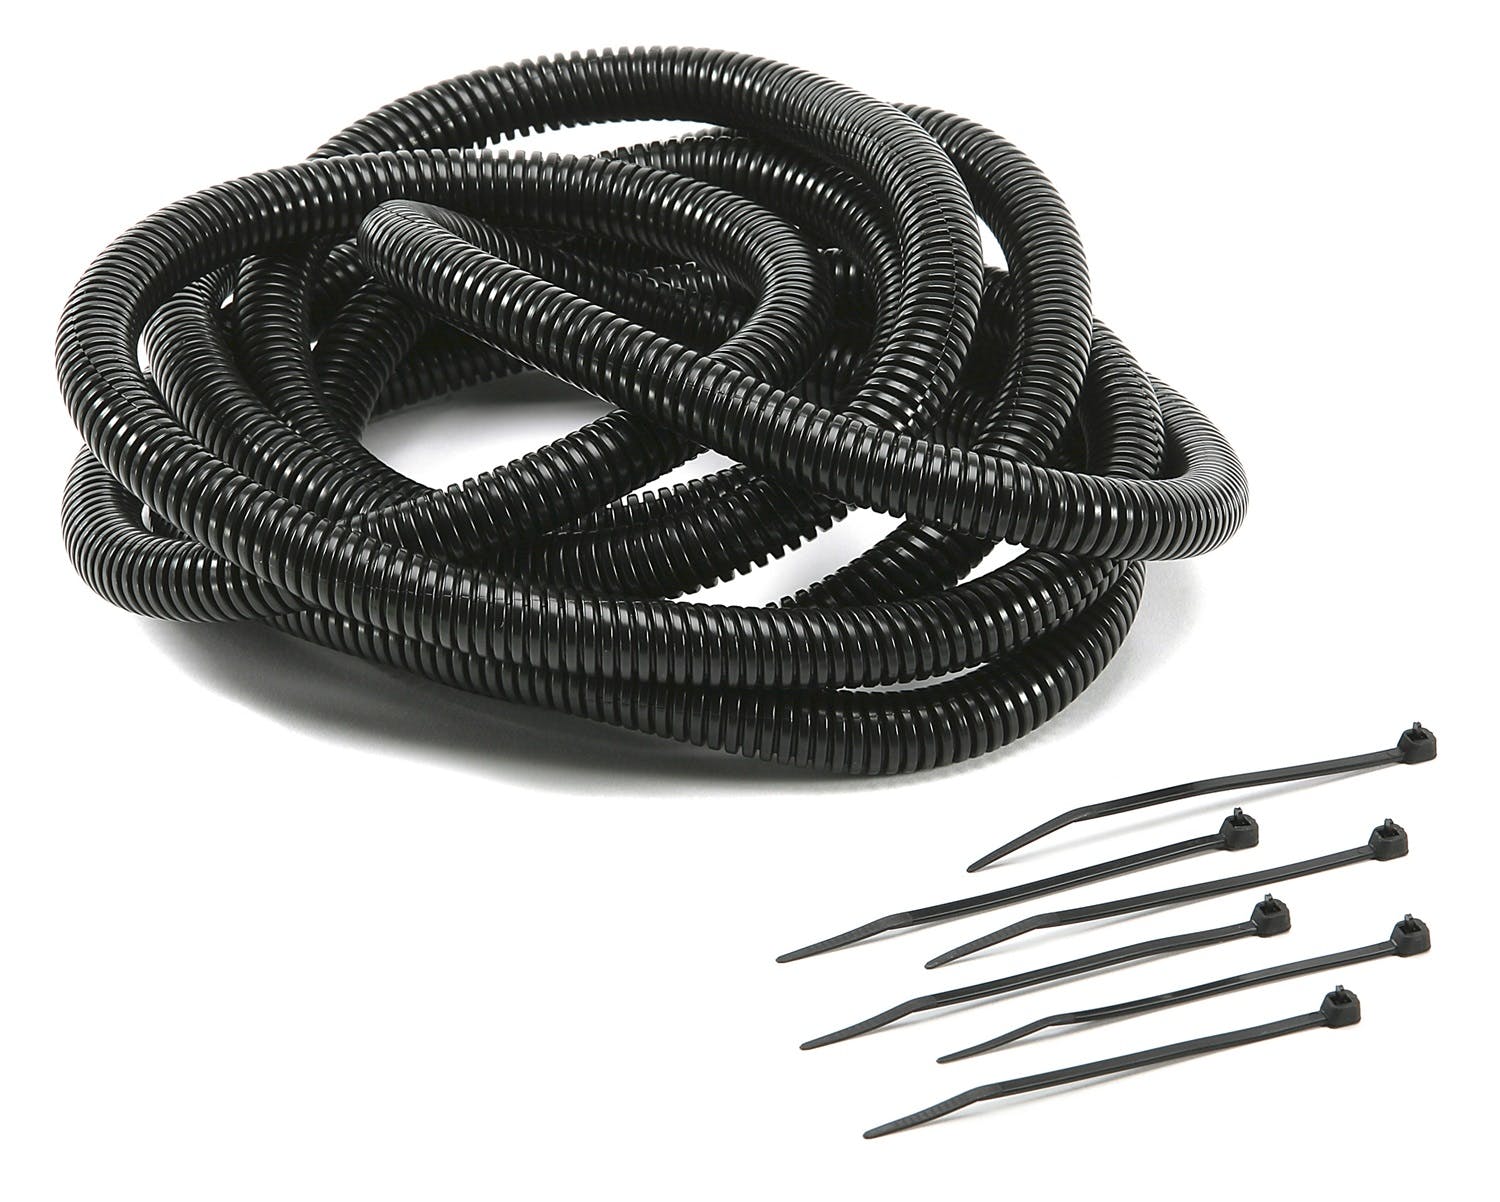 Mr. Gasket 4500 WIRE COVER KIT 10L X 1/4 BLK